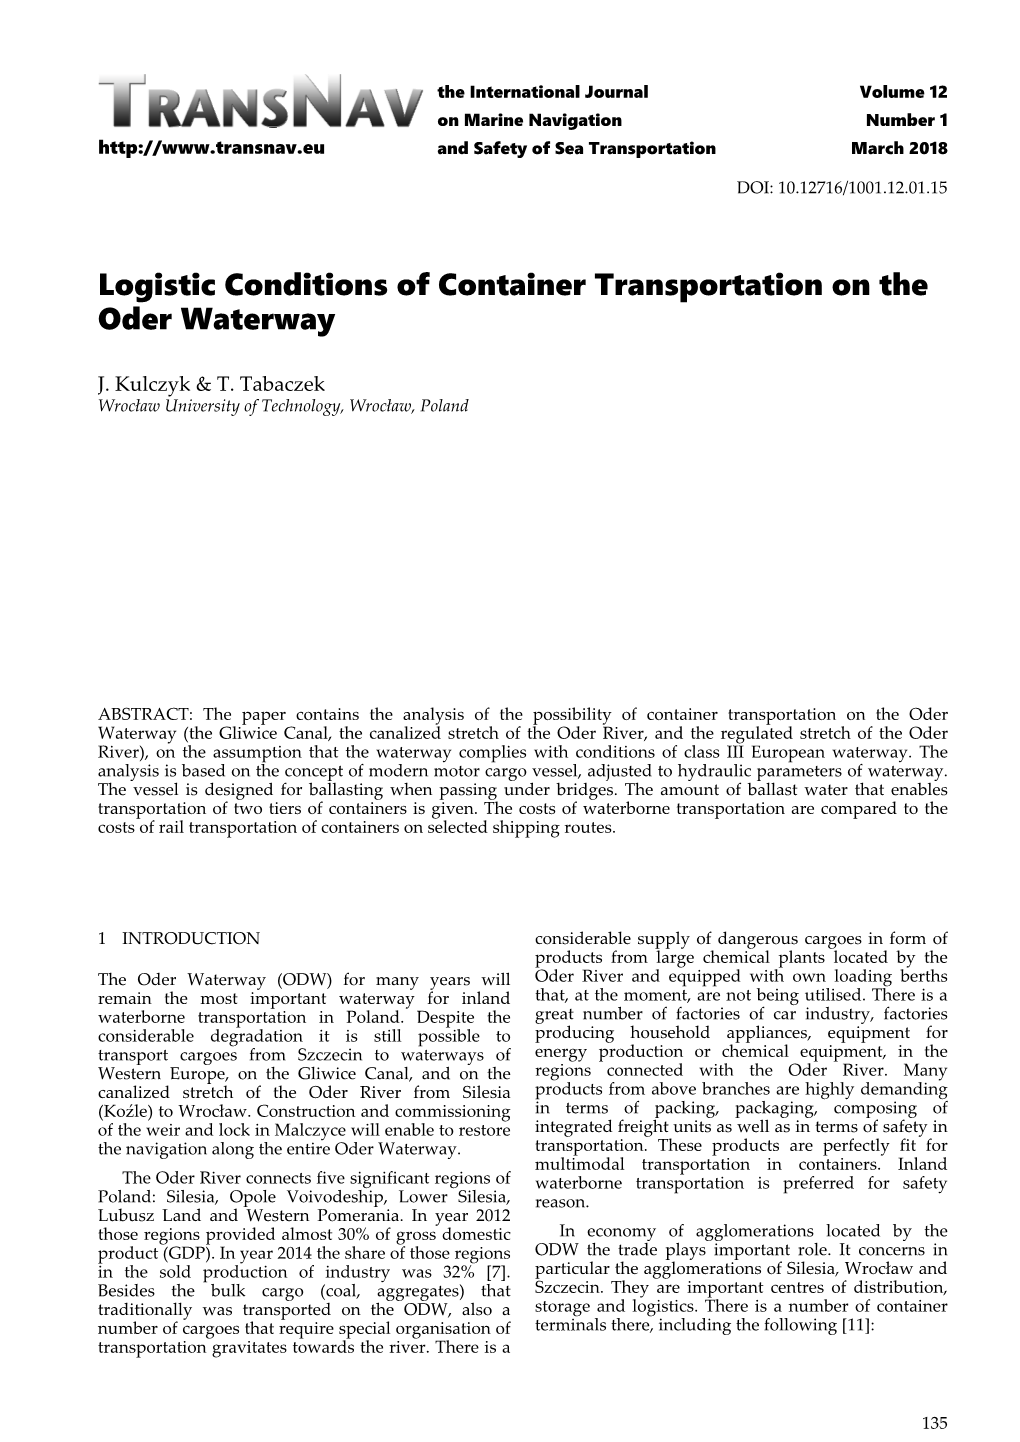 Logistic Conditions of Container Transportation on the Oder Waterway